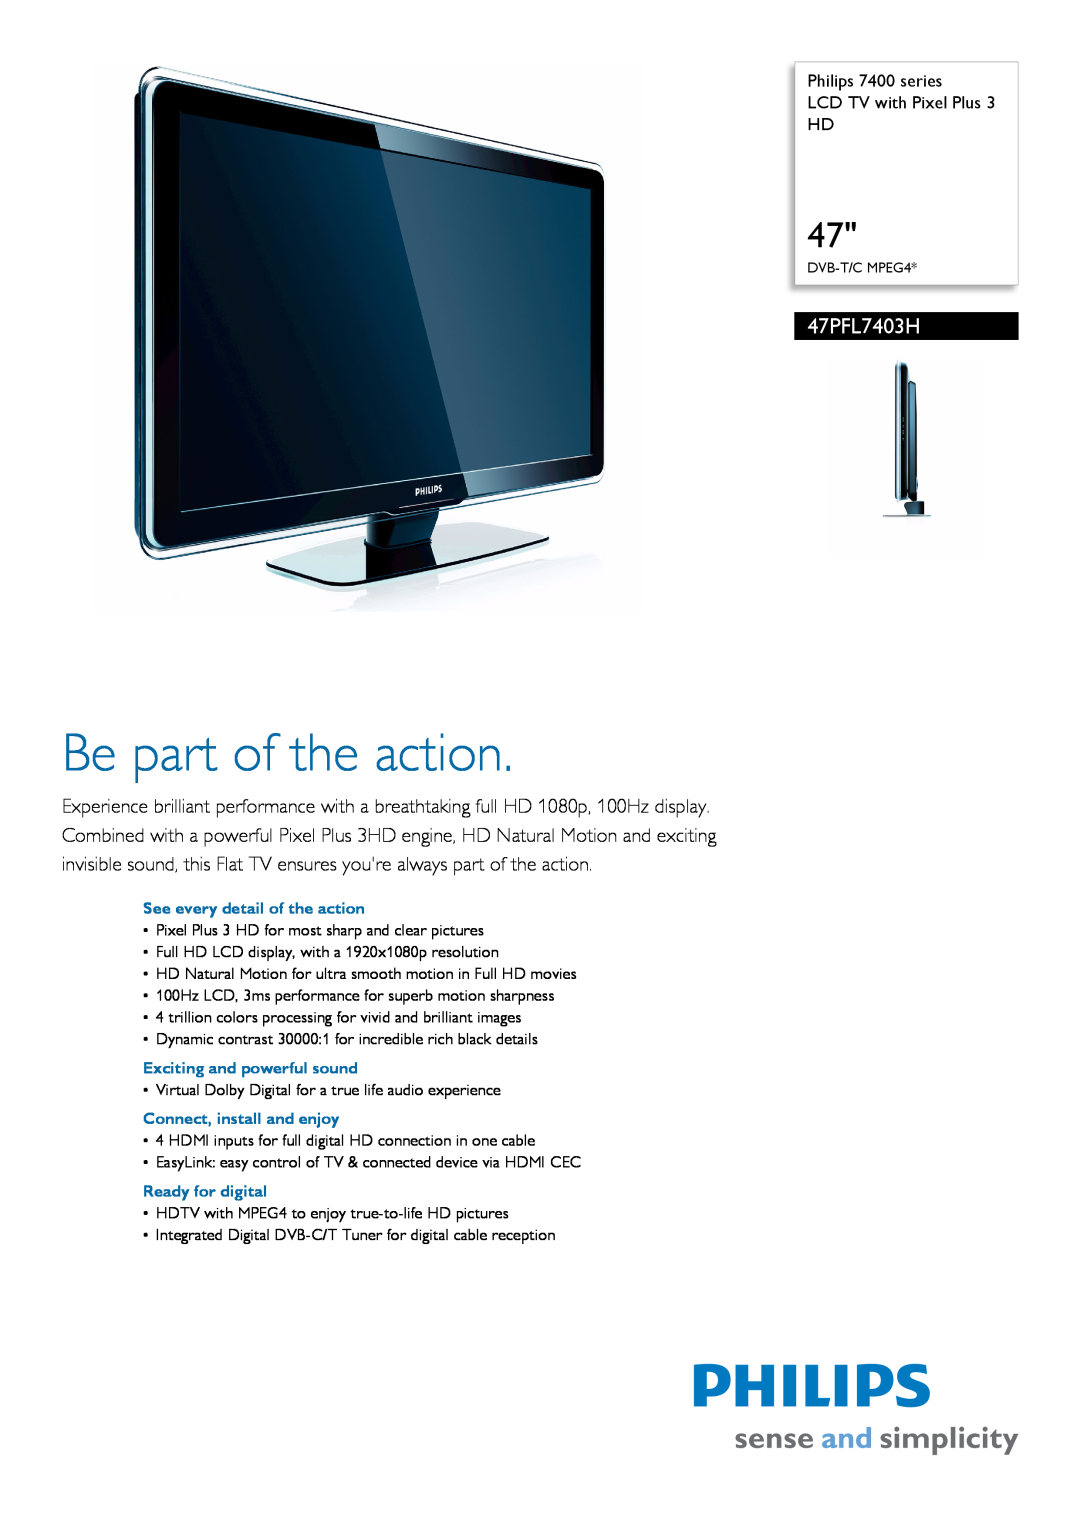 Philips 47PFL7403H/10 manual Philips 7400 series LCD TV with Pixel Plus HD, Be part of the action 